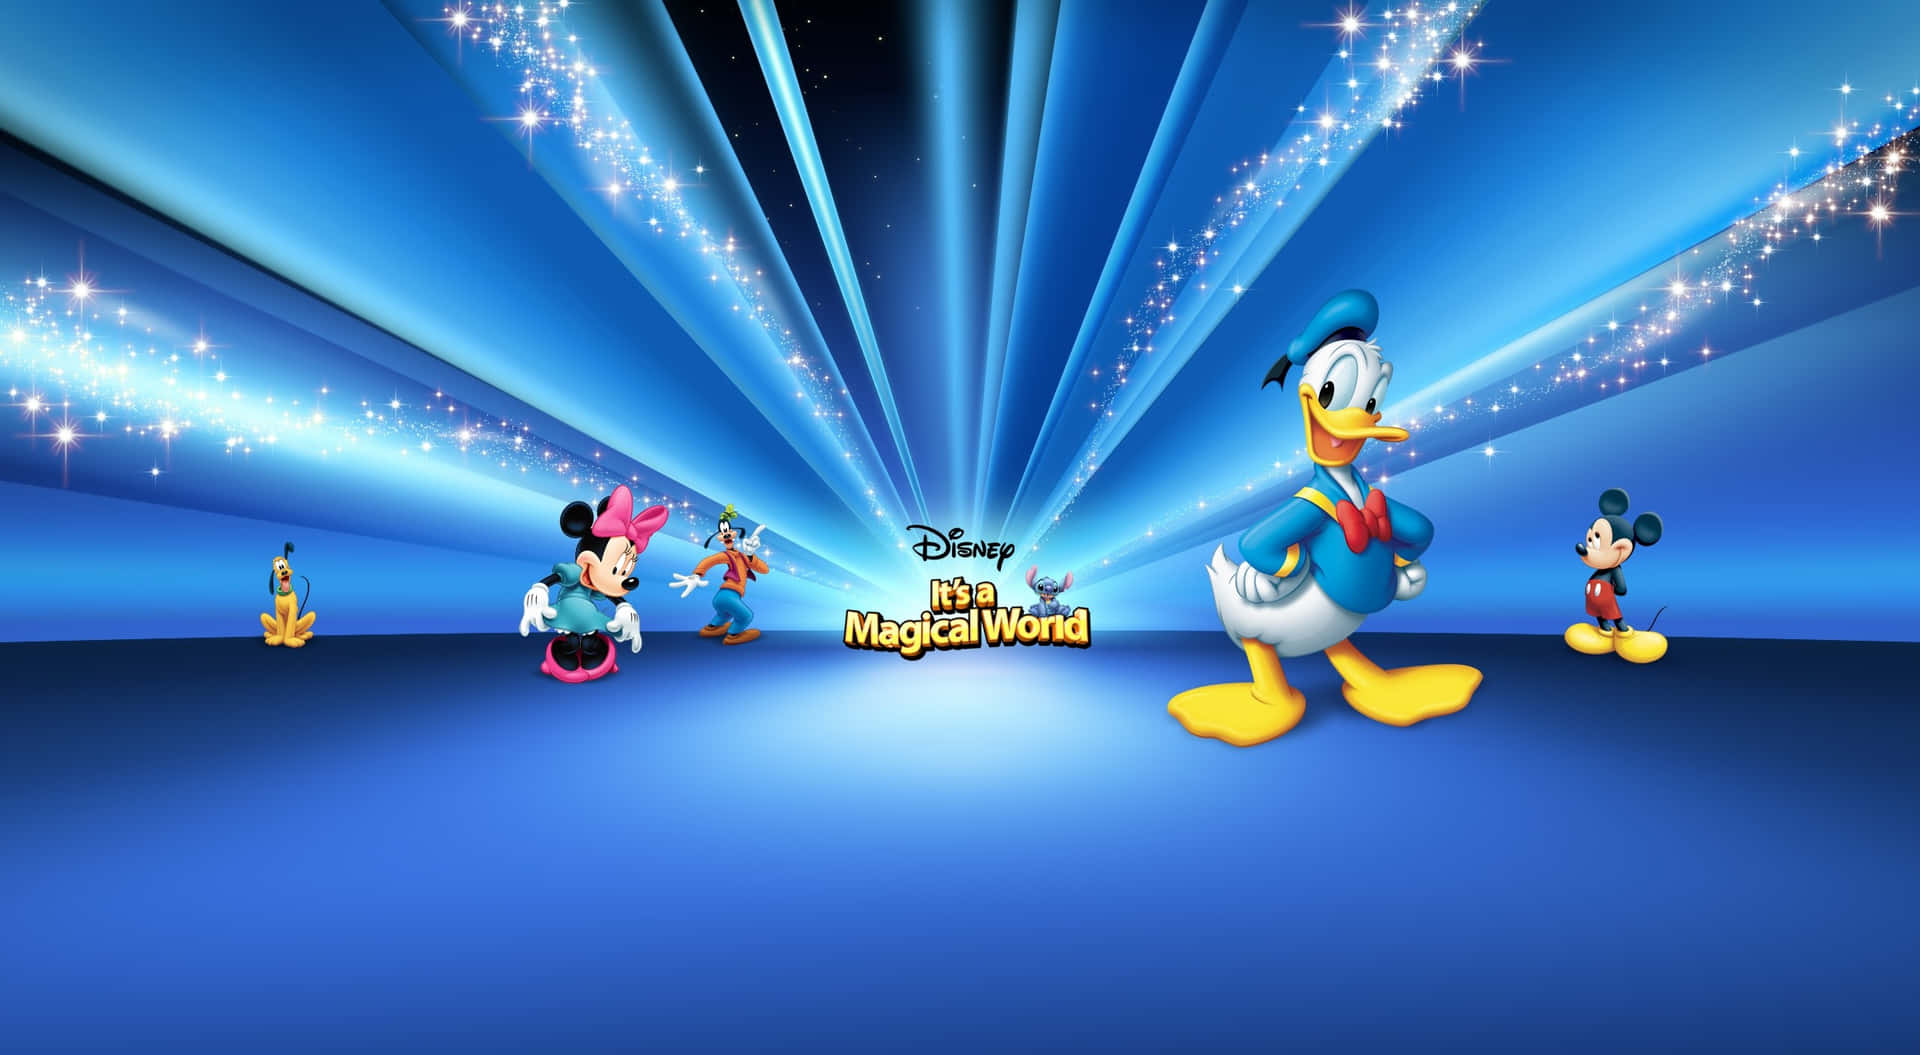 It's A Magical World 1440p Disney Background Poster